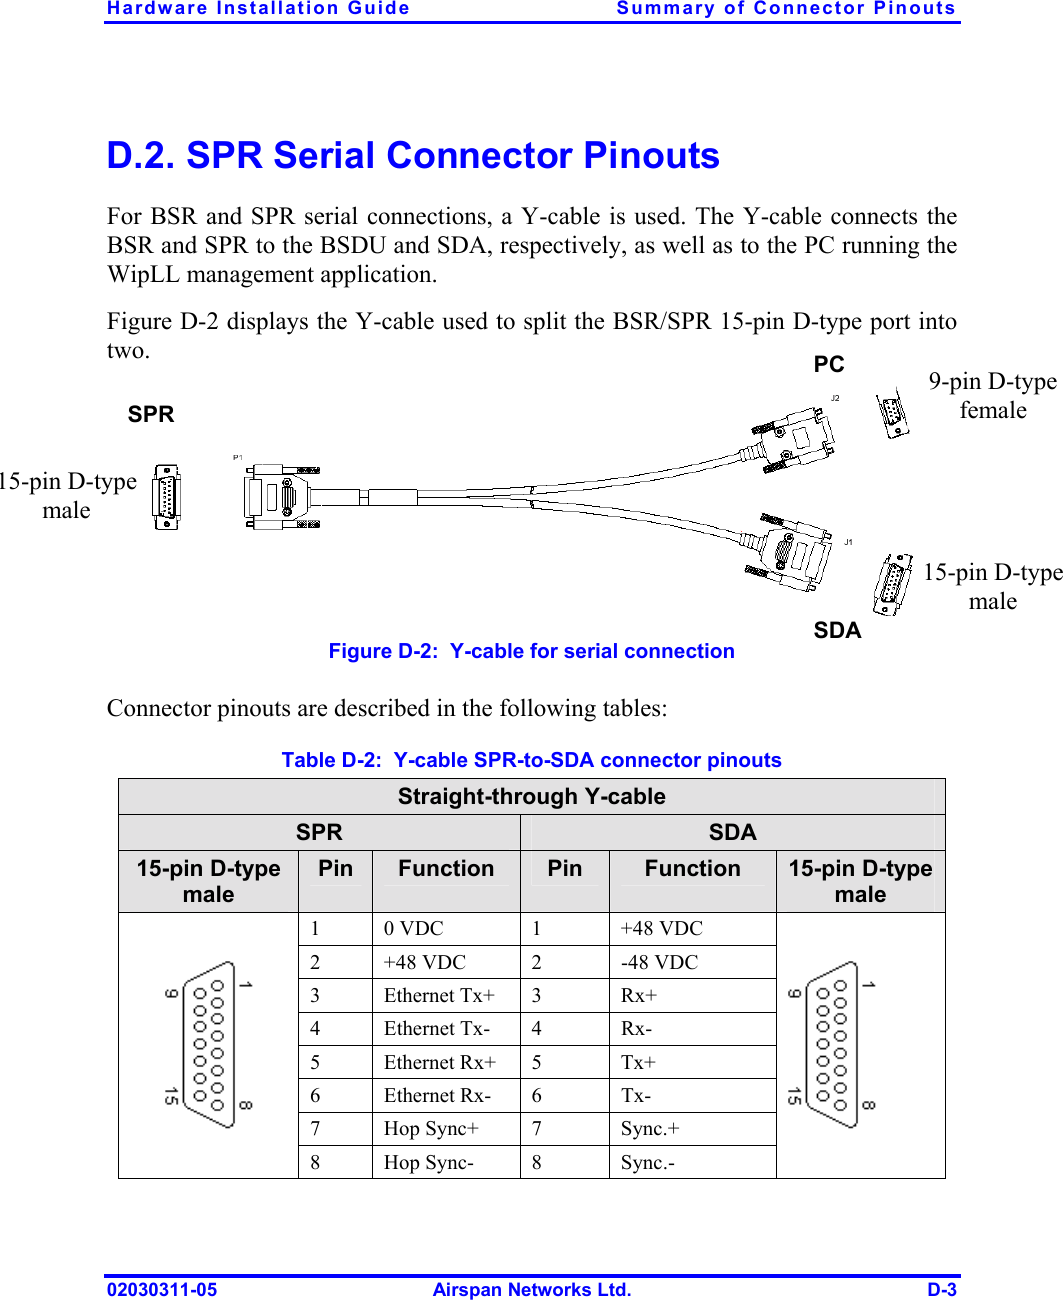 Hardware Installation Guide  Summary of Connector Pinouts 02030311-05  Airspan Networks Ltd.  D-3 D.2. SPR Serial Connector Pinouts For BSR and SPR serial connections, a Y-cable is used. The Y-cable connects the BSR and SPR to the BSDU and SDA, respectively, as well as to the PC running the WipLL management application.  Figure  D-2 displays the Y-cable used to split the BSR/SPR 15-pin D-type port into two.  Figure  D-2:  Y-cable for serial connection Connector pinouts are described in the following tables:  Table  D-2:  Y-cable SPR-to-SDA connector pinouts Straight-through Y-cable SPR  SDA 15-pin D-type male Pin  Function  Pin  Function  15-pin D-type male 1  0 VDC  1  +48 VDC 2  +48 VDC  2  -48 VDC 3 Ethernet Tx+ 3  Rx+ 4 Ethernet Tx- 4  Rx- 5 Ethernet Rx+ 5  Tx+ 6 Ethernet Rx- 6  Tx- 7 Hop Sync+ 7  Sync.+  8 Hop Sync- 8  Sync.-  15-pin D-type male  PC SDA  15-pin D-typemale 9-pin D-typefemale  SPR 